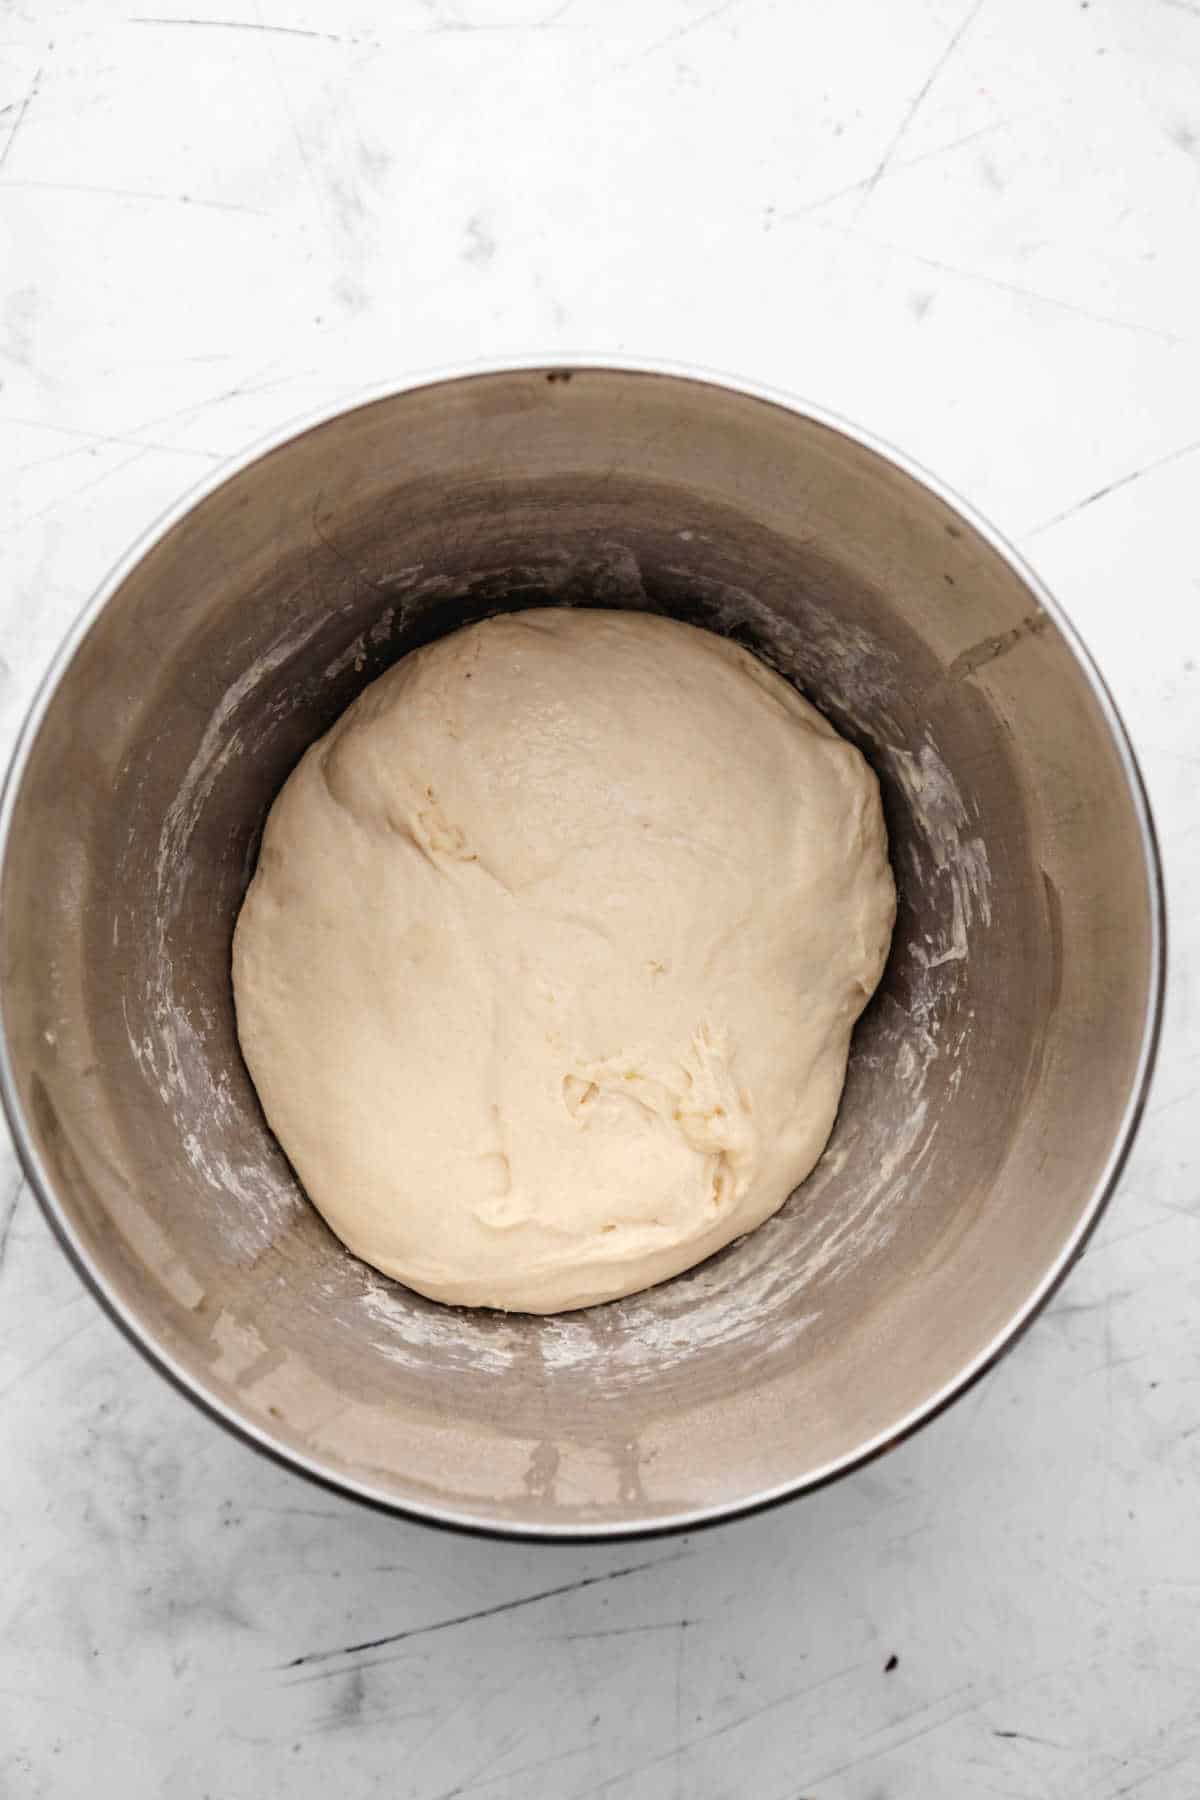 Skillet bread dough in a silver mixing bowl.